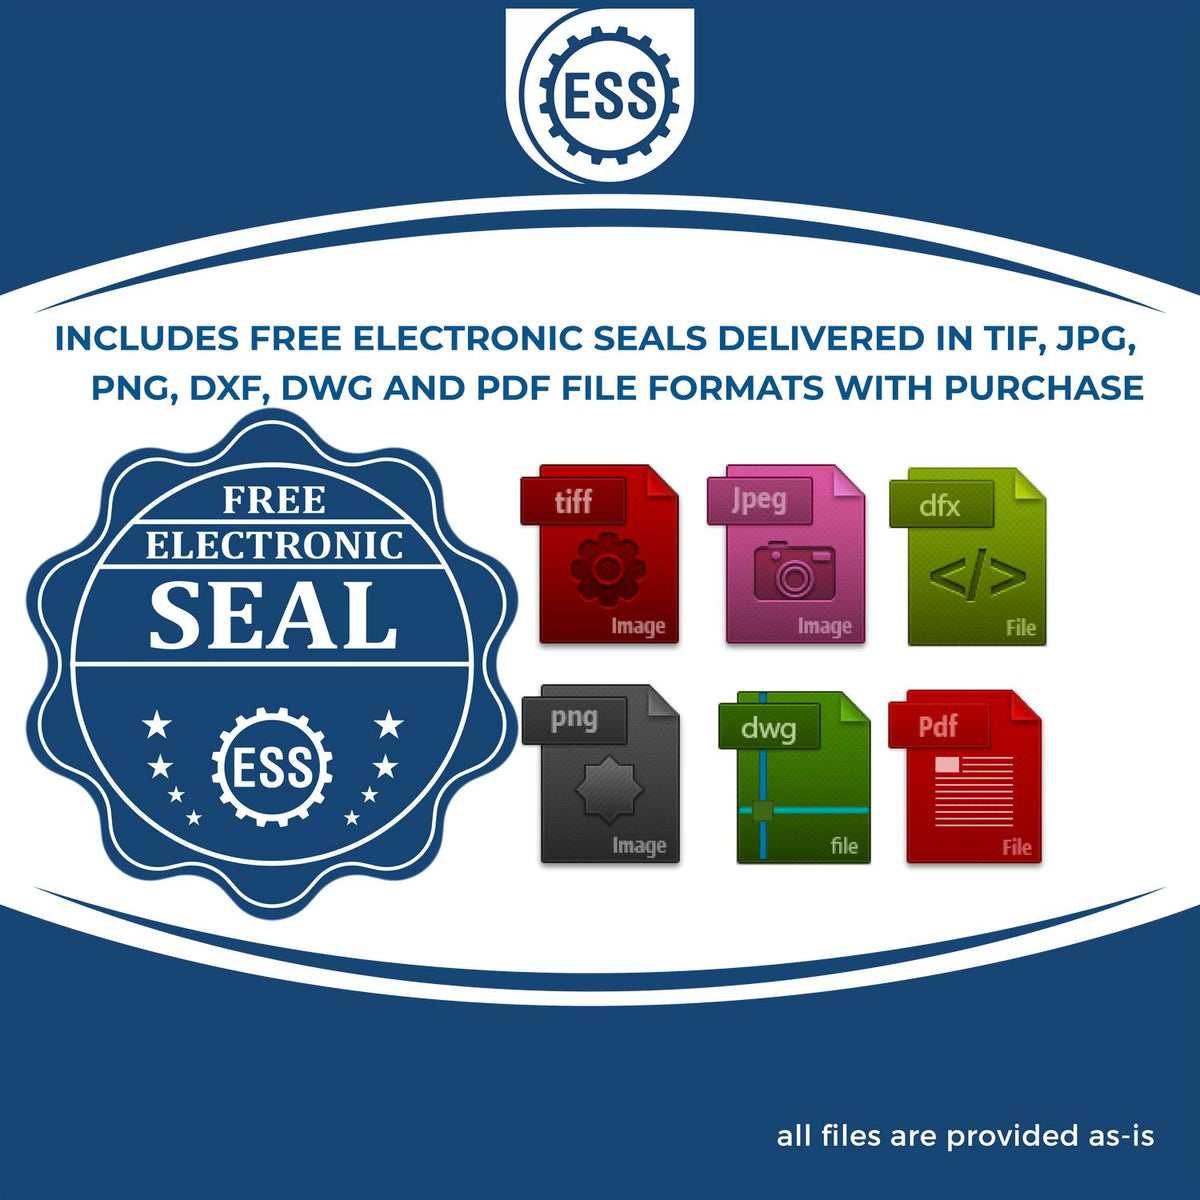 An infographic for the free electronic seal for the Premium MaxLight Pre-Inked Maryland Engineering Stamp illustrating the different file type icons such as DXF, DWG, TIF, JPG and PNG.